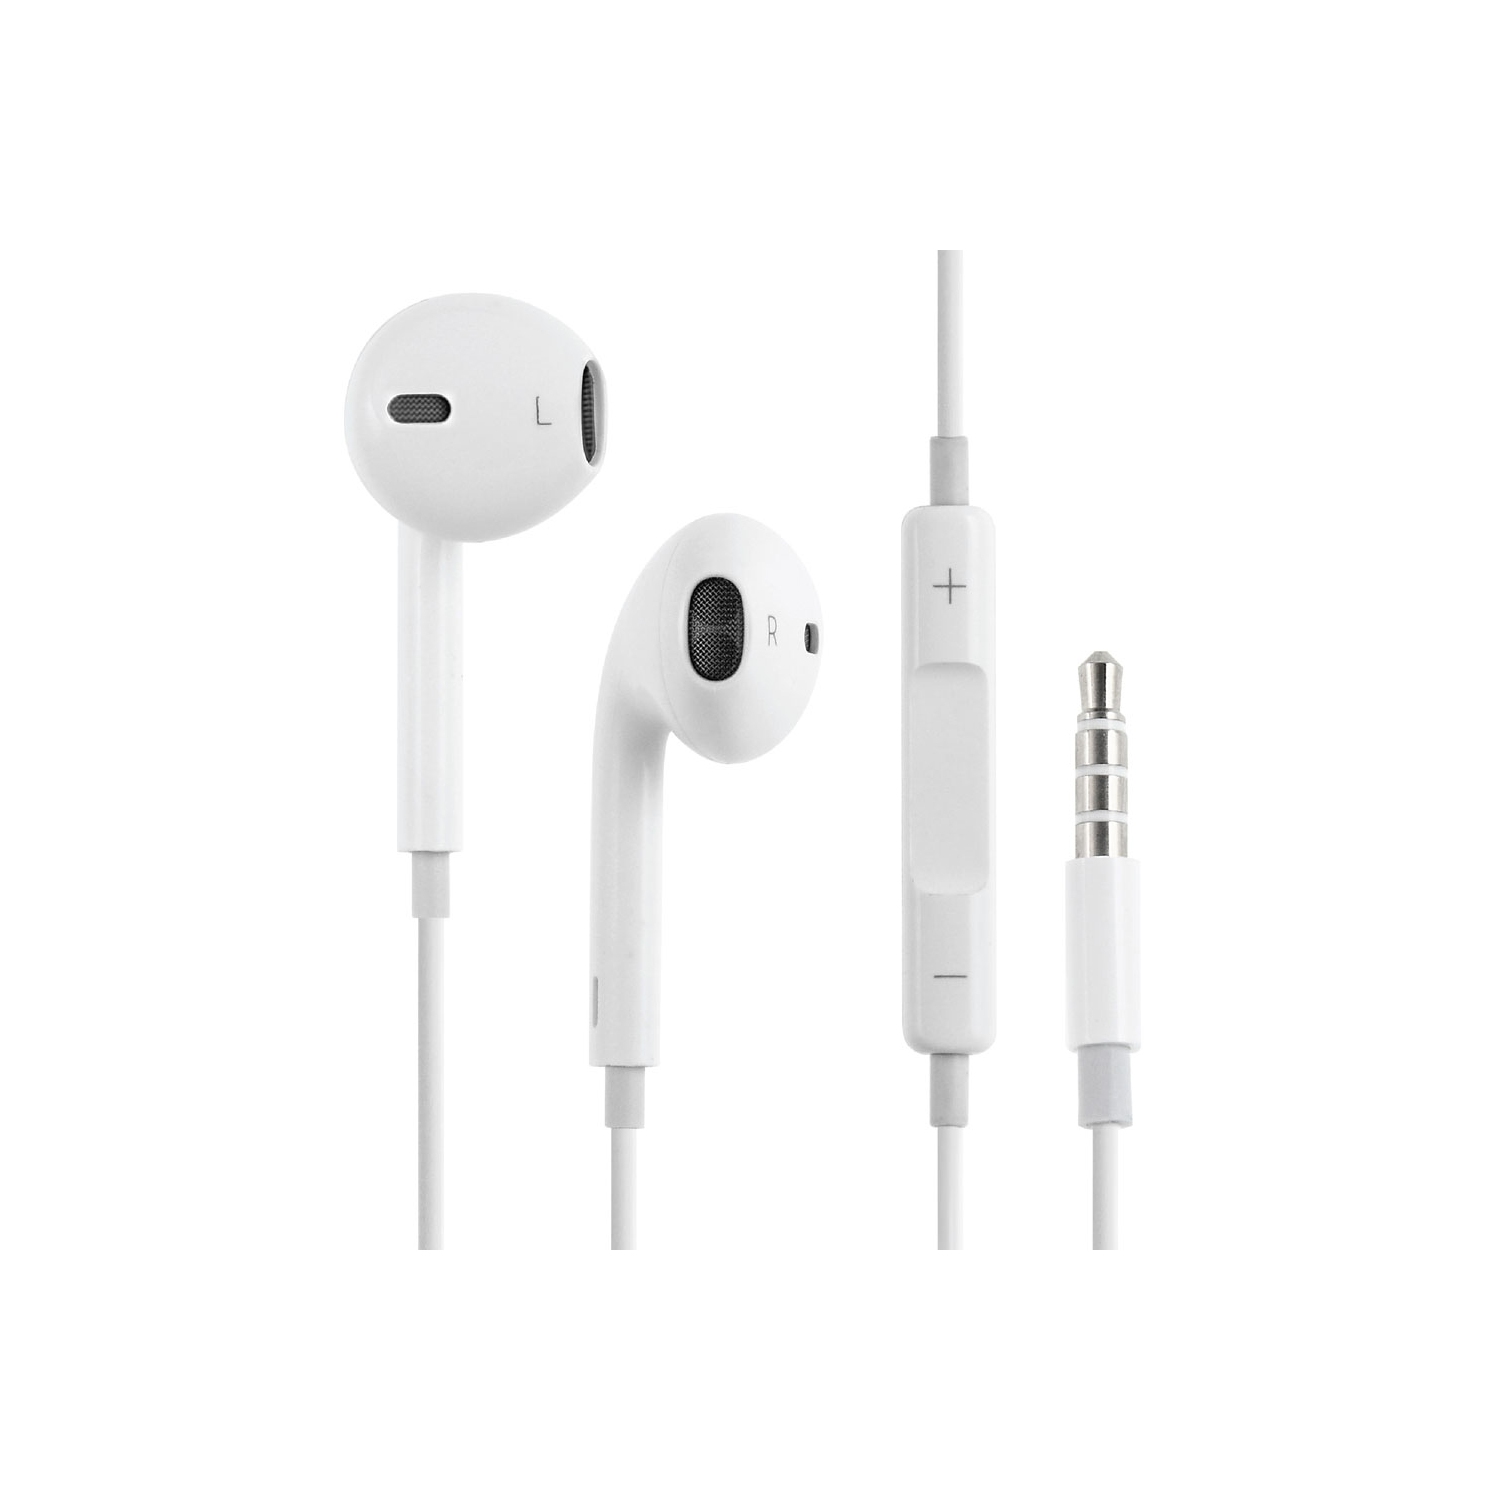 3.5mm Audio Jack iPhone Headphones Earphones Earbuds with Volume Buttons & Mic COMPATIBLE for iPhone 5 5S SE 6 6S Plus